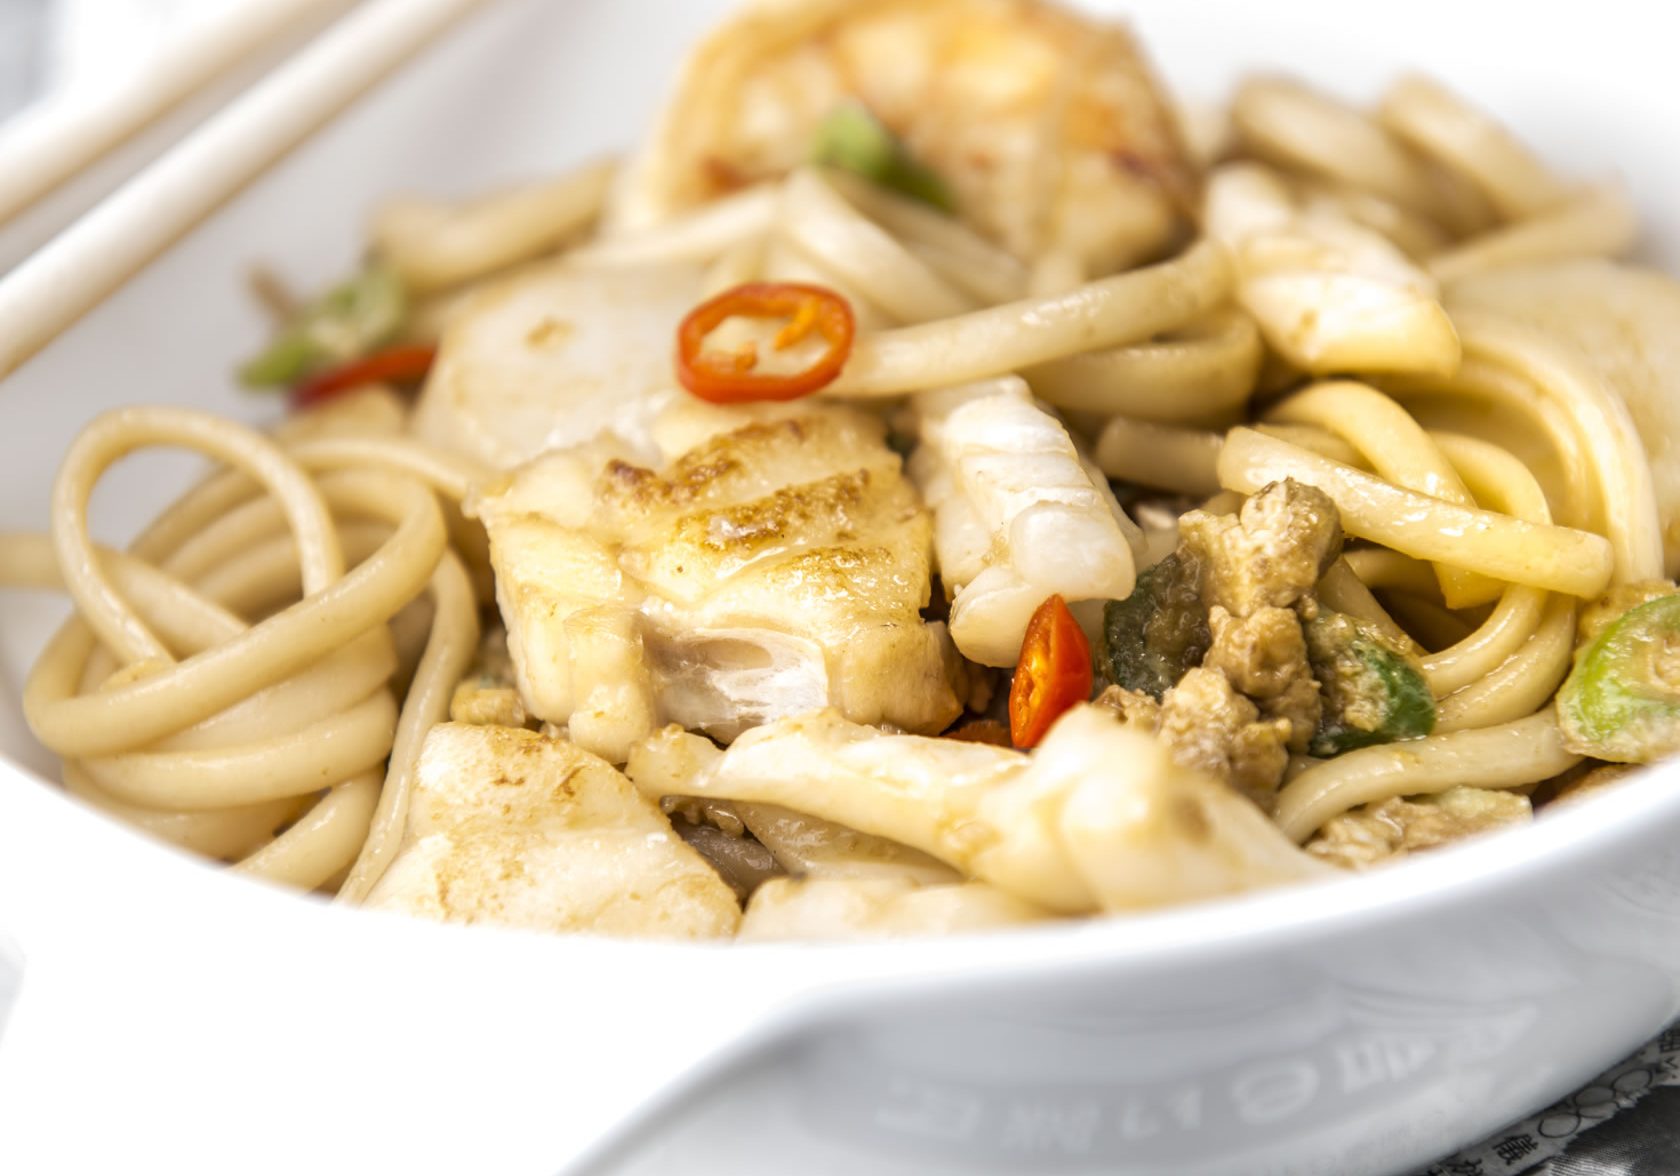 Seafood Stir-fry with Udon Noodles